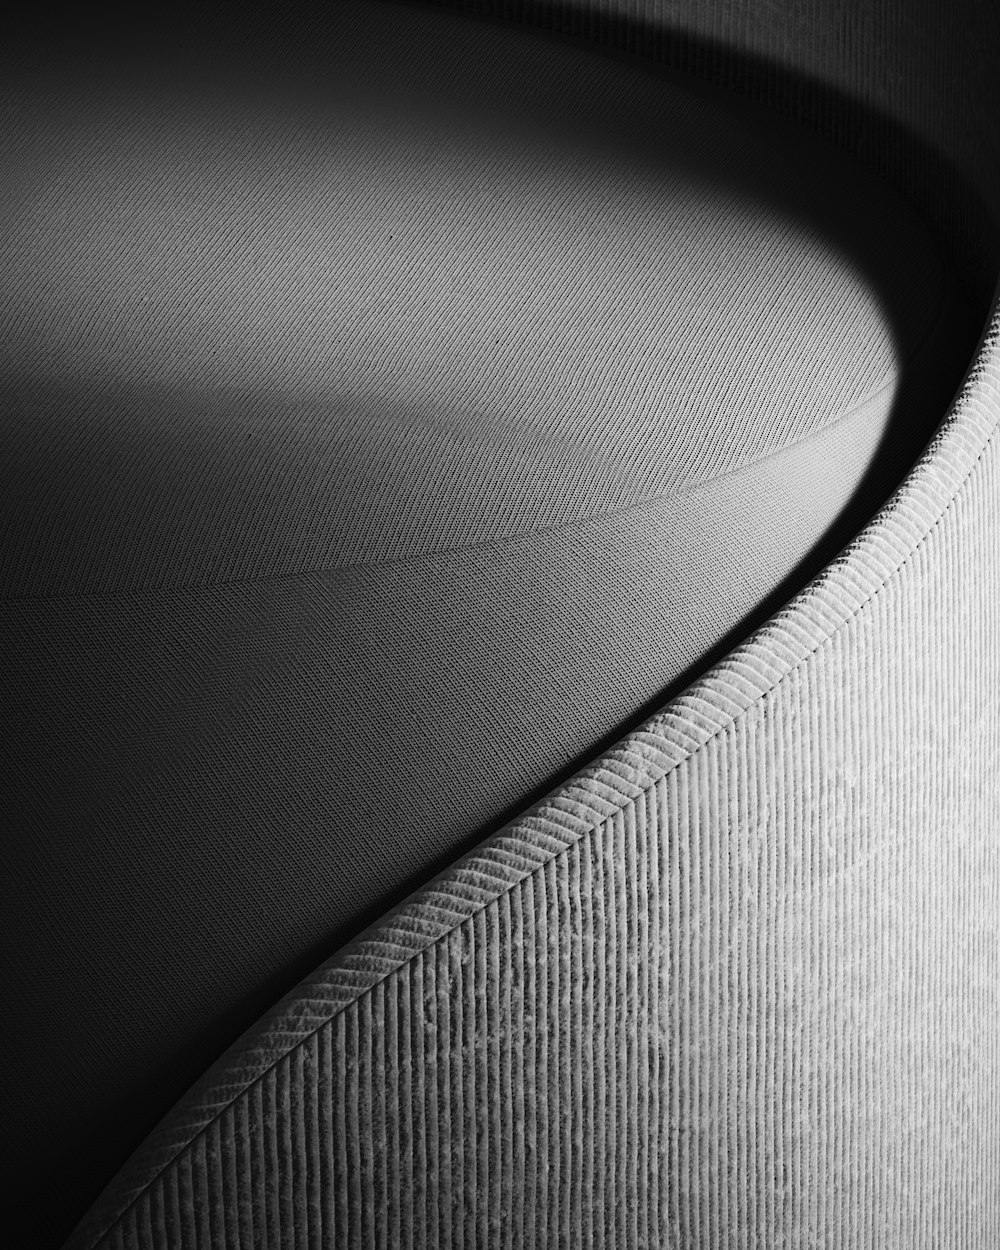 a black and white photo of a curved lamp shade